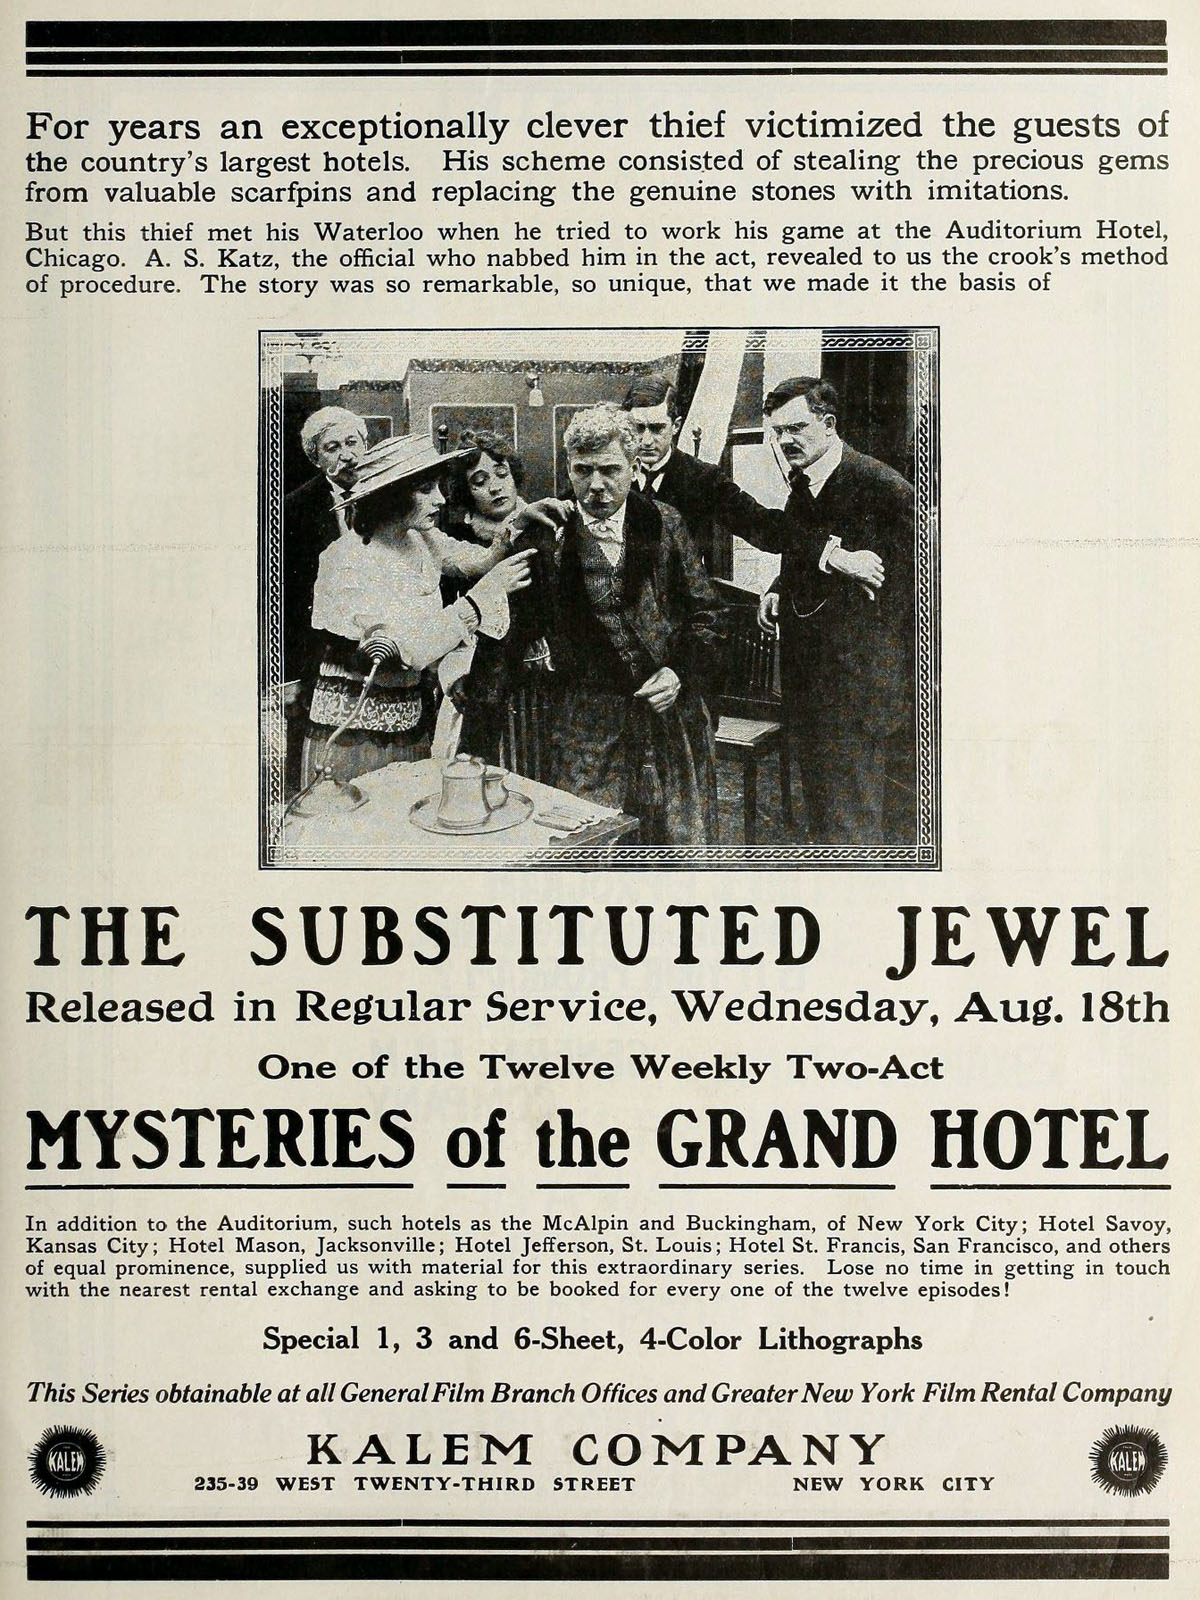 Mysteries of the Grand Hotel #5 The Substituted Jewel